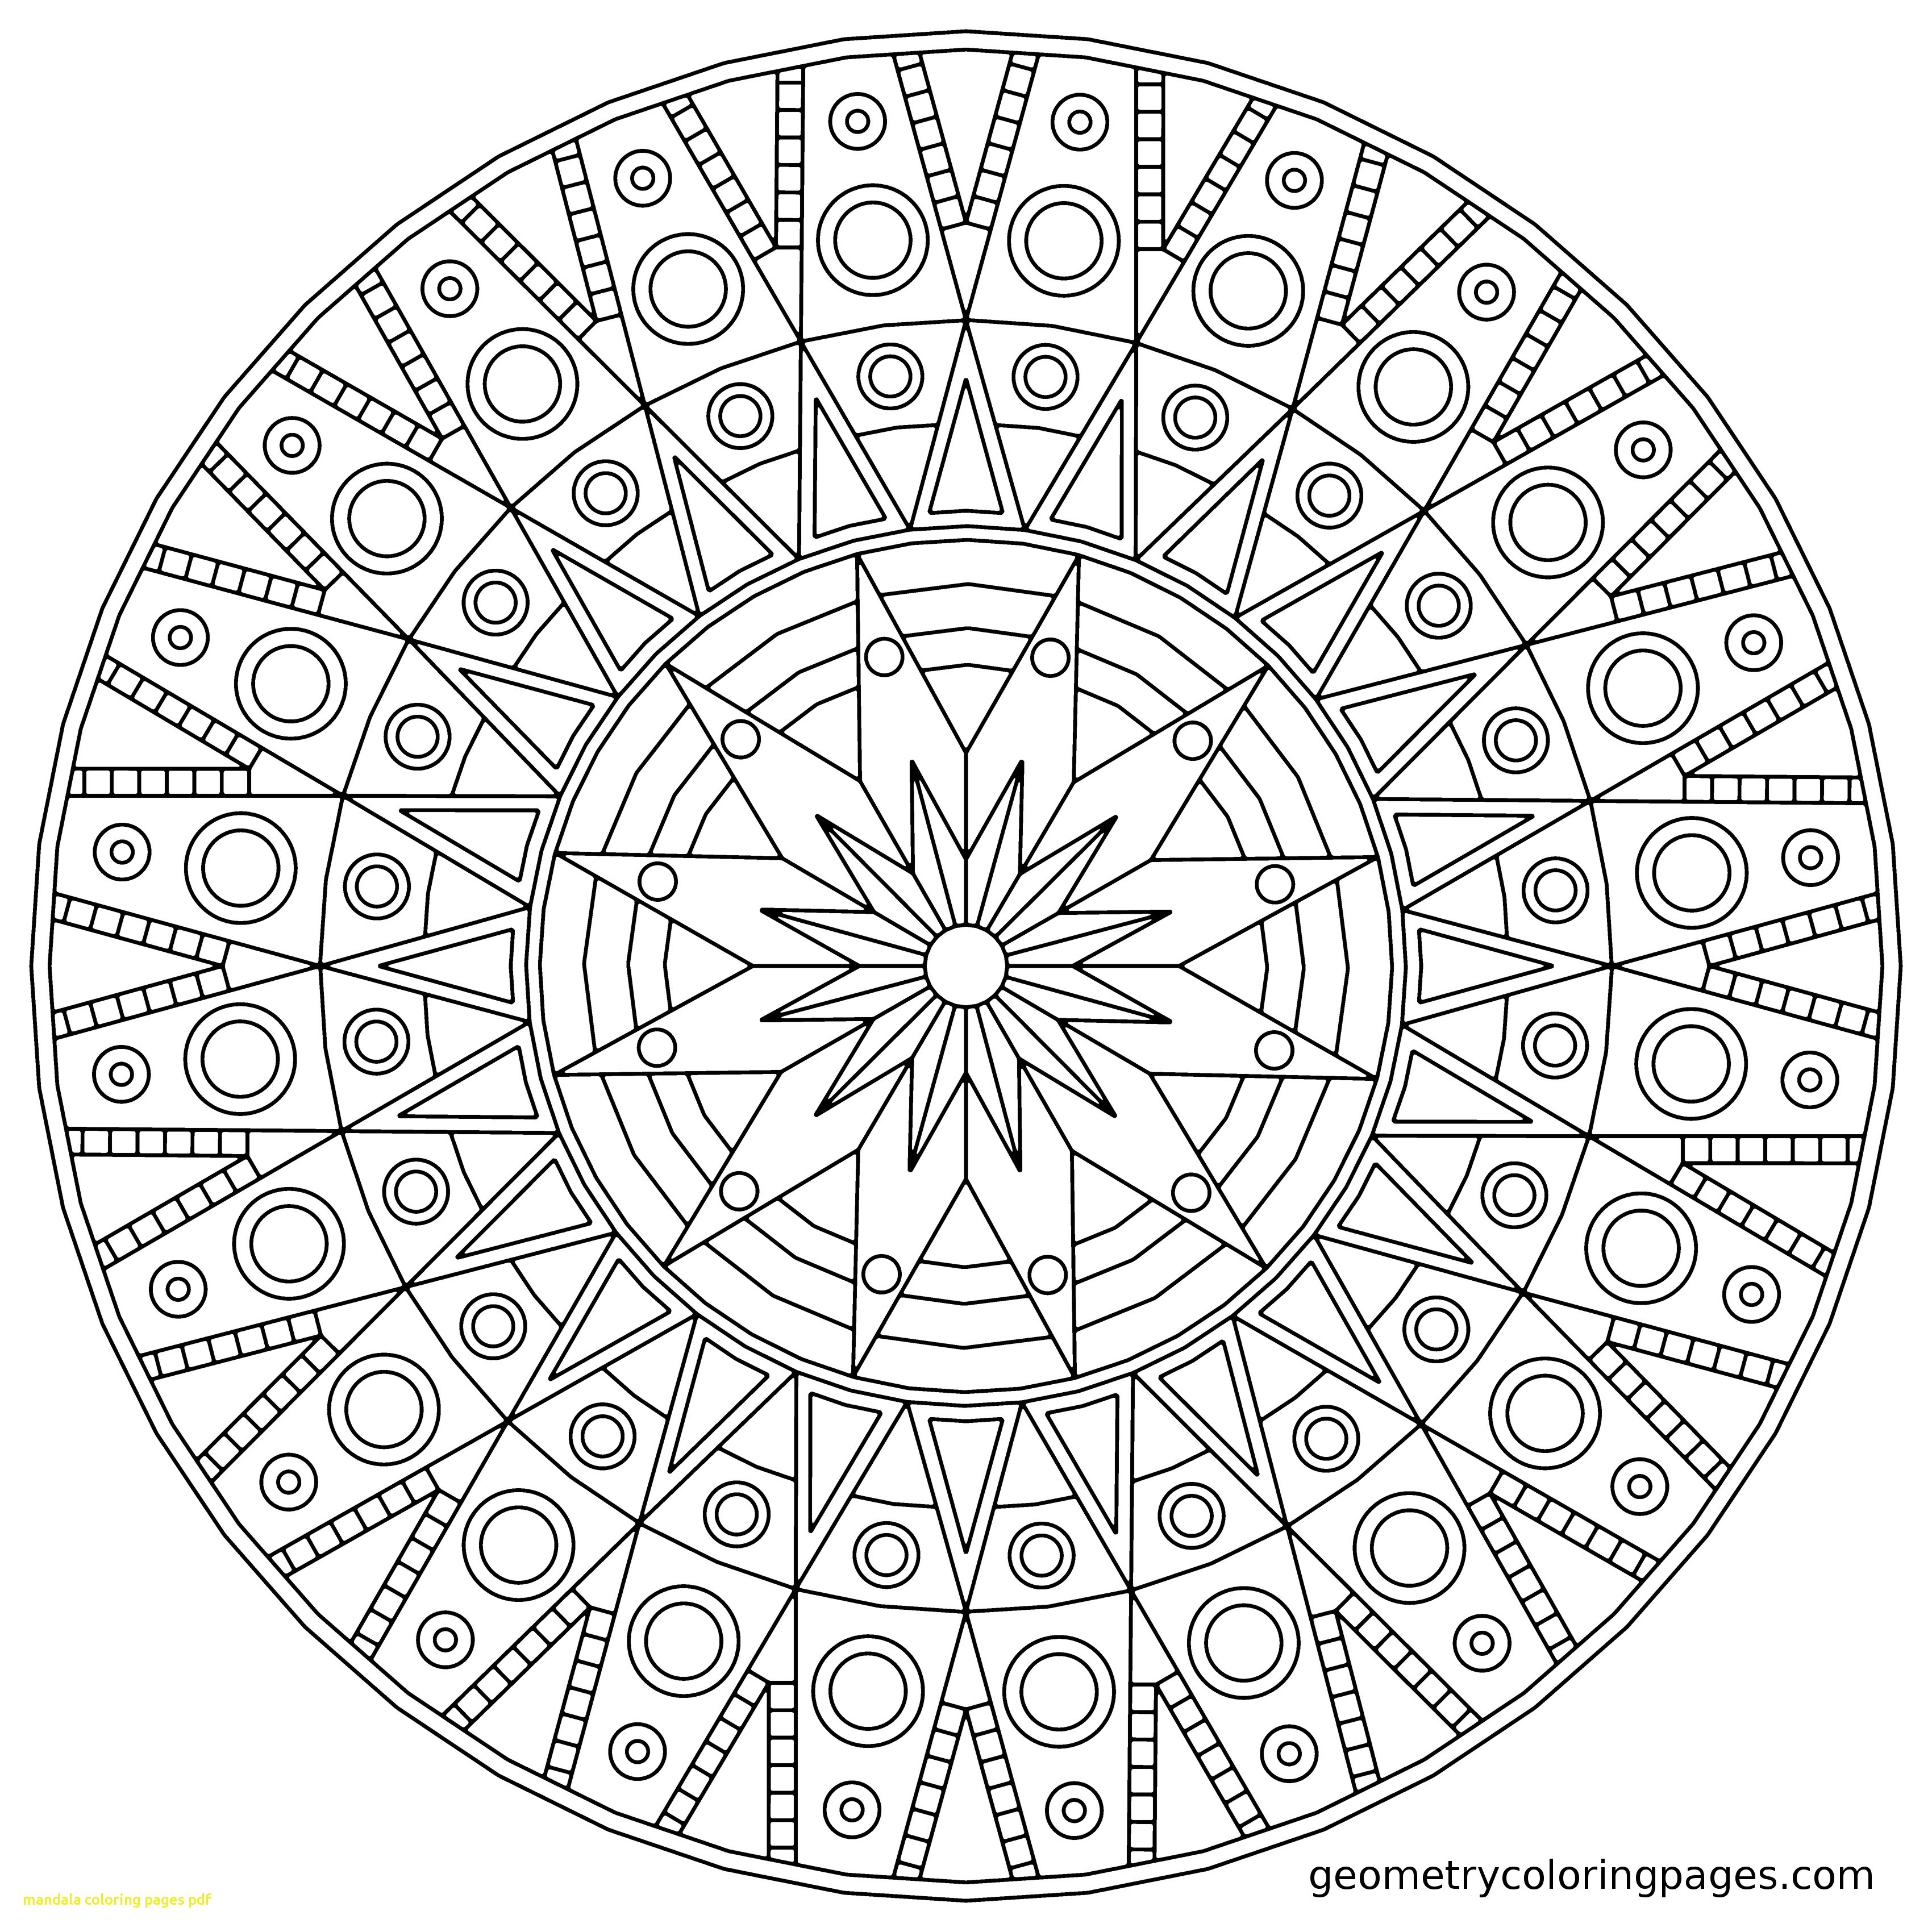 Mandala Coloring Book Pages
 Geometric Mandalas Coloring Pages Collection